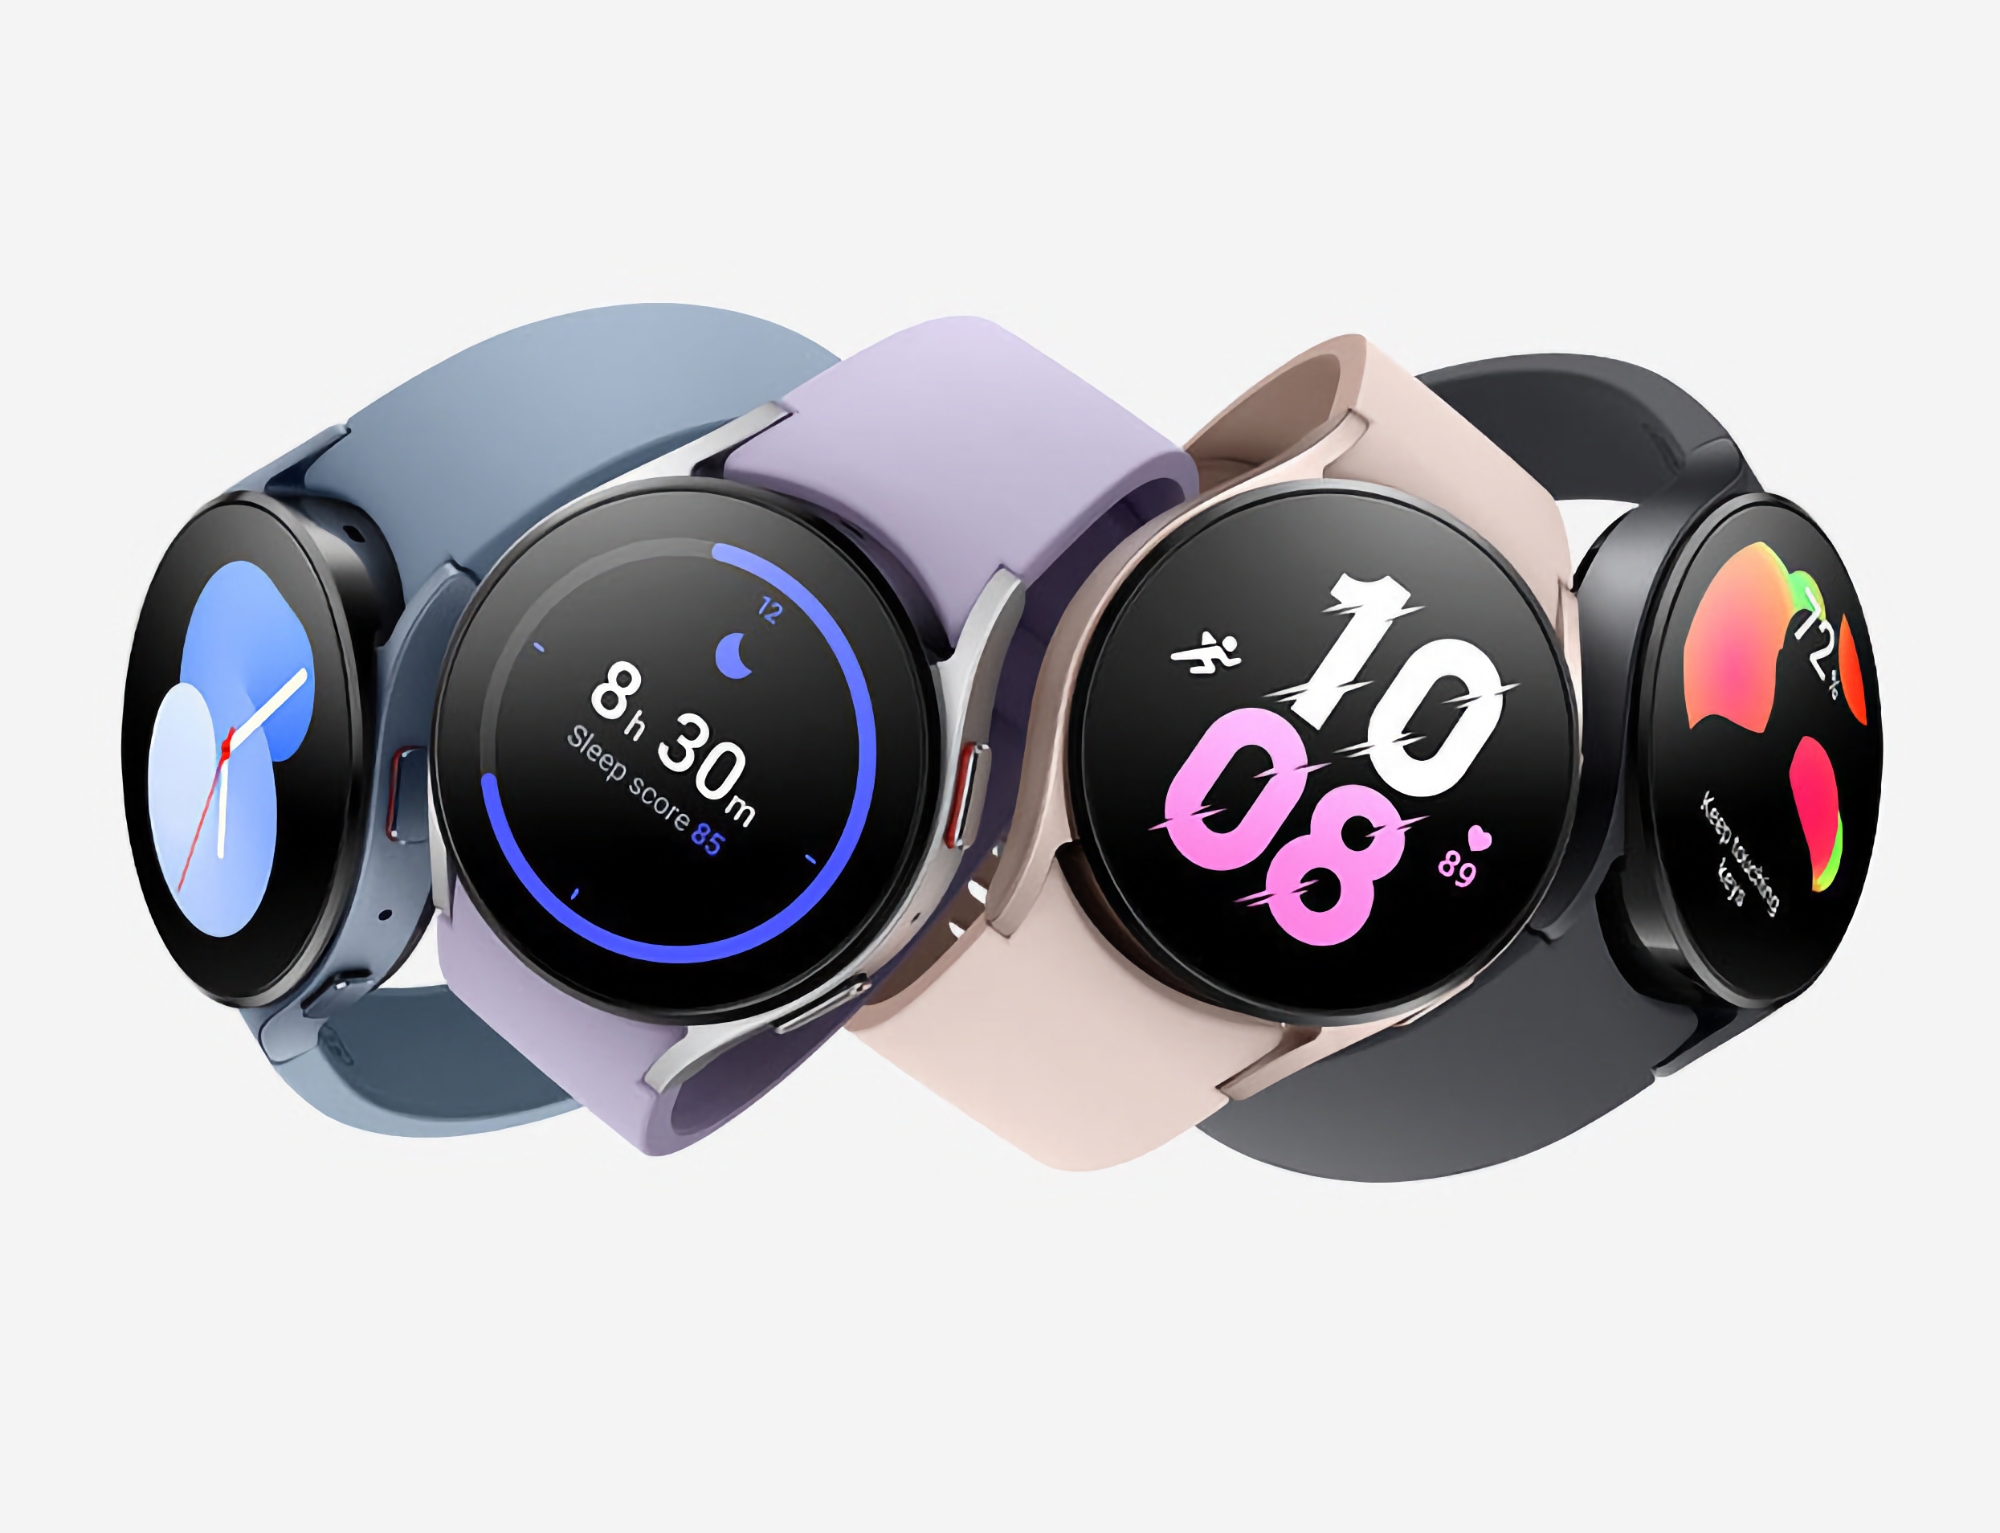 Insider: Galaxy Watch 6 smartwatch comes in two sizes and OLED display up to 1.47"